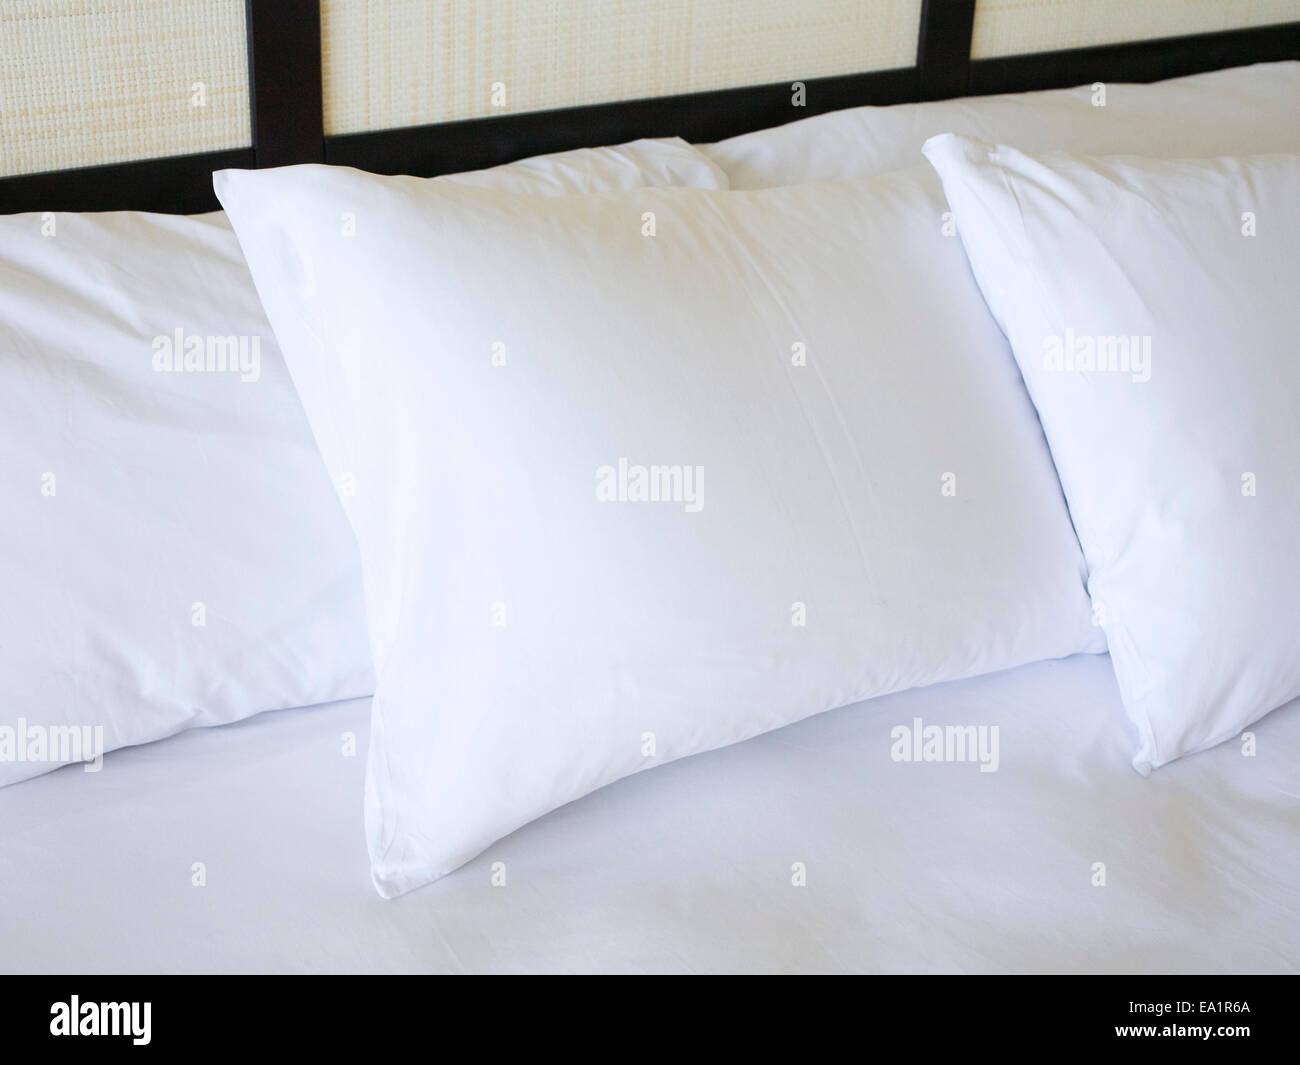 Fluffy white Pillows on bed Stock Photo